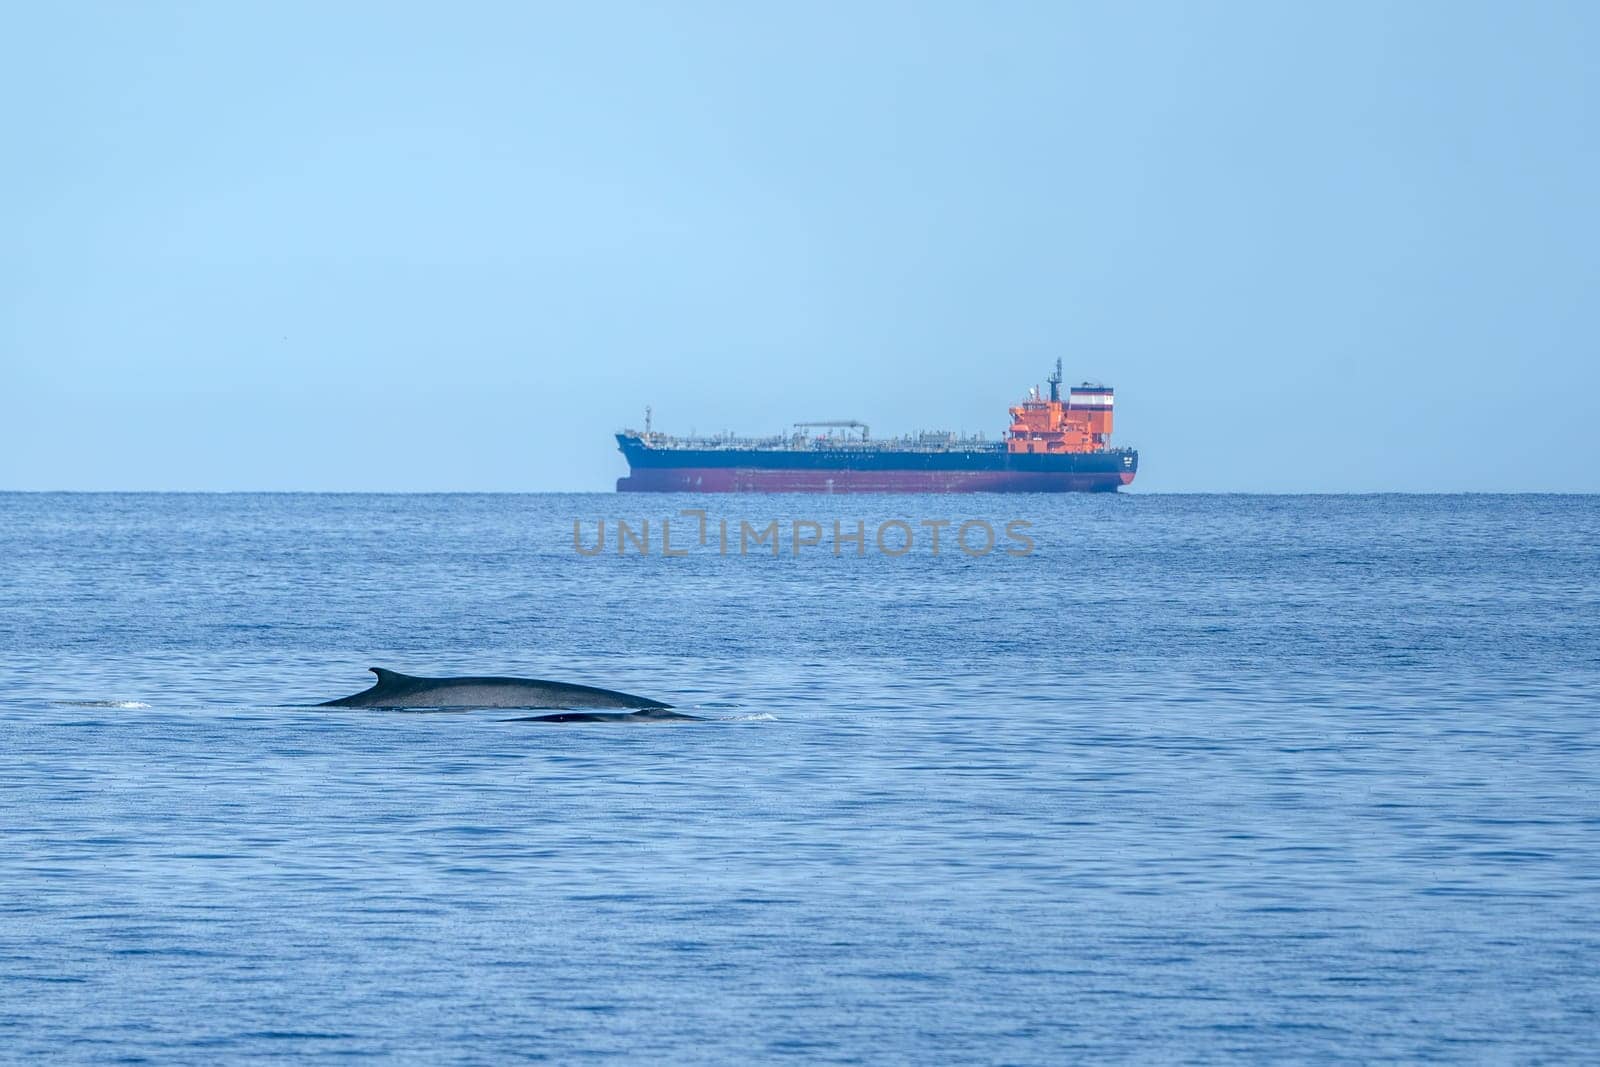 Two Fin Whales mother and calf Balaenoptera physalus endangered rare to see in Mediterranean sea by AndreaIzzotti